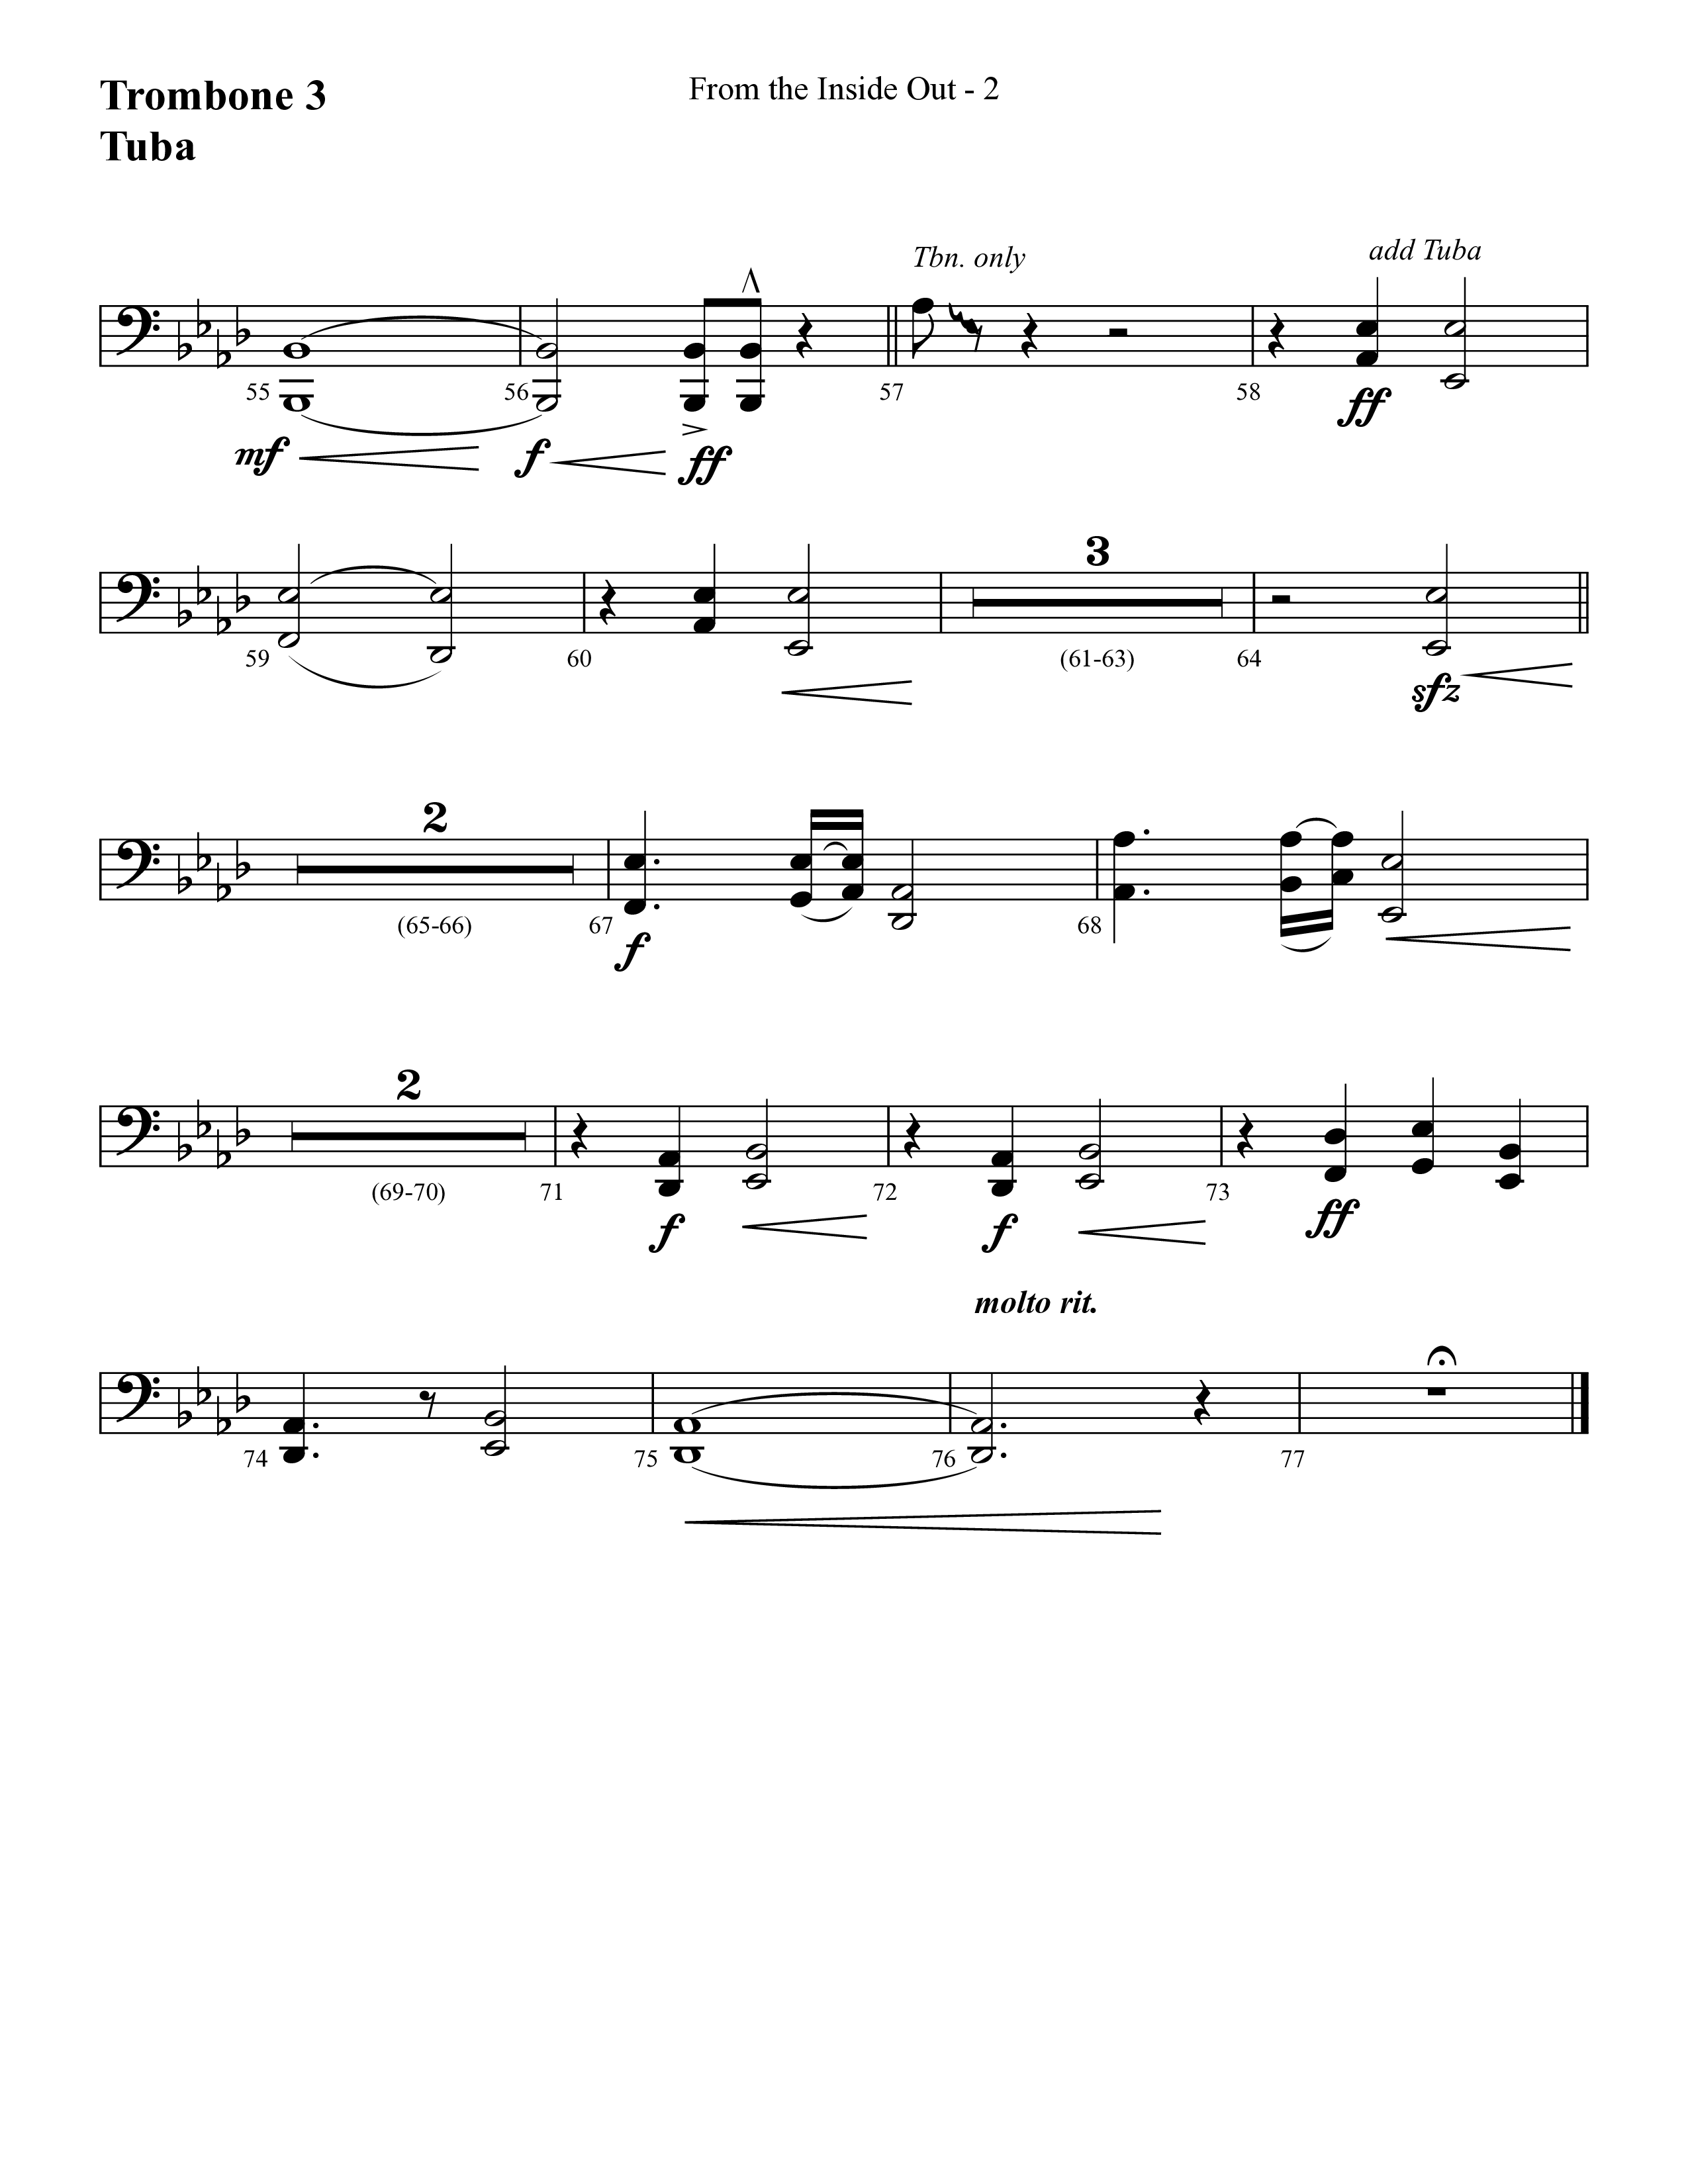 From The Inside Out (Choral Anthem SATB) Trombone 3/Tuba (Lifeway Choral / Arr. Cliff Duren)